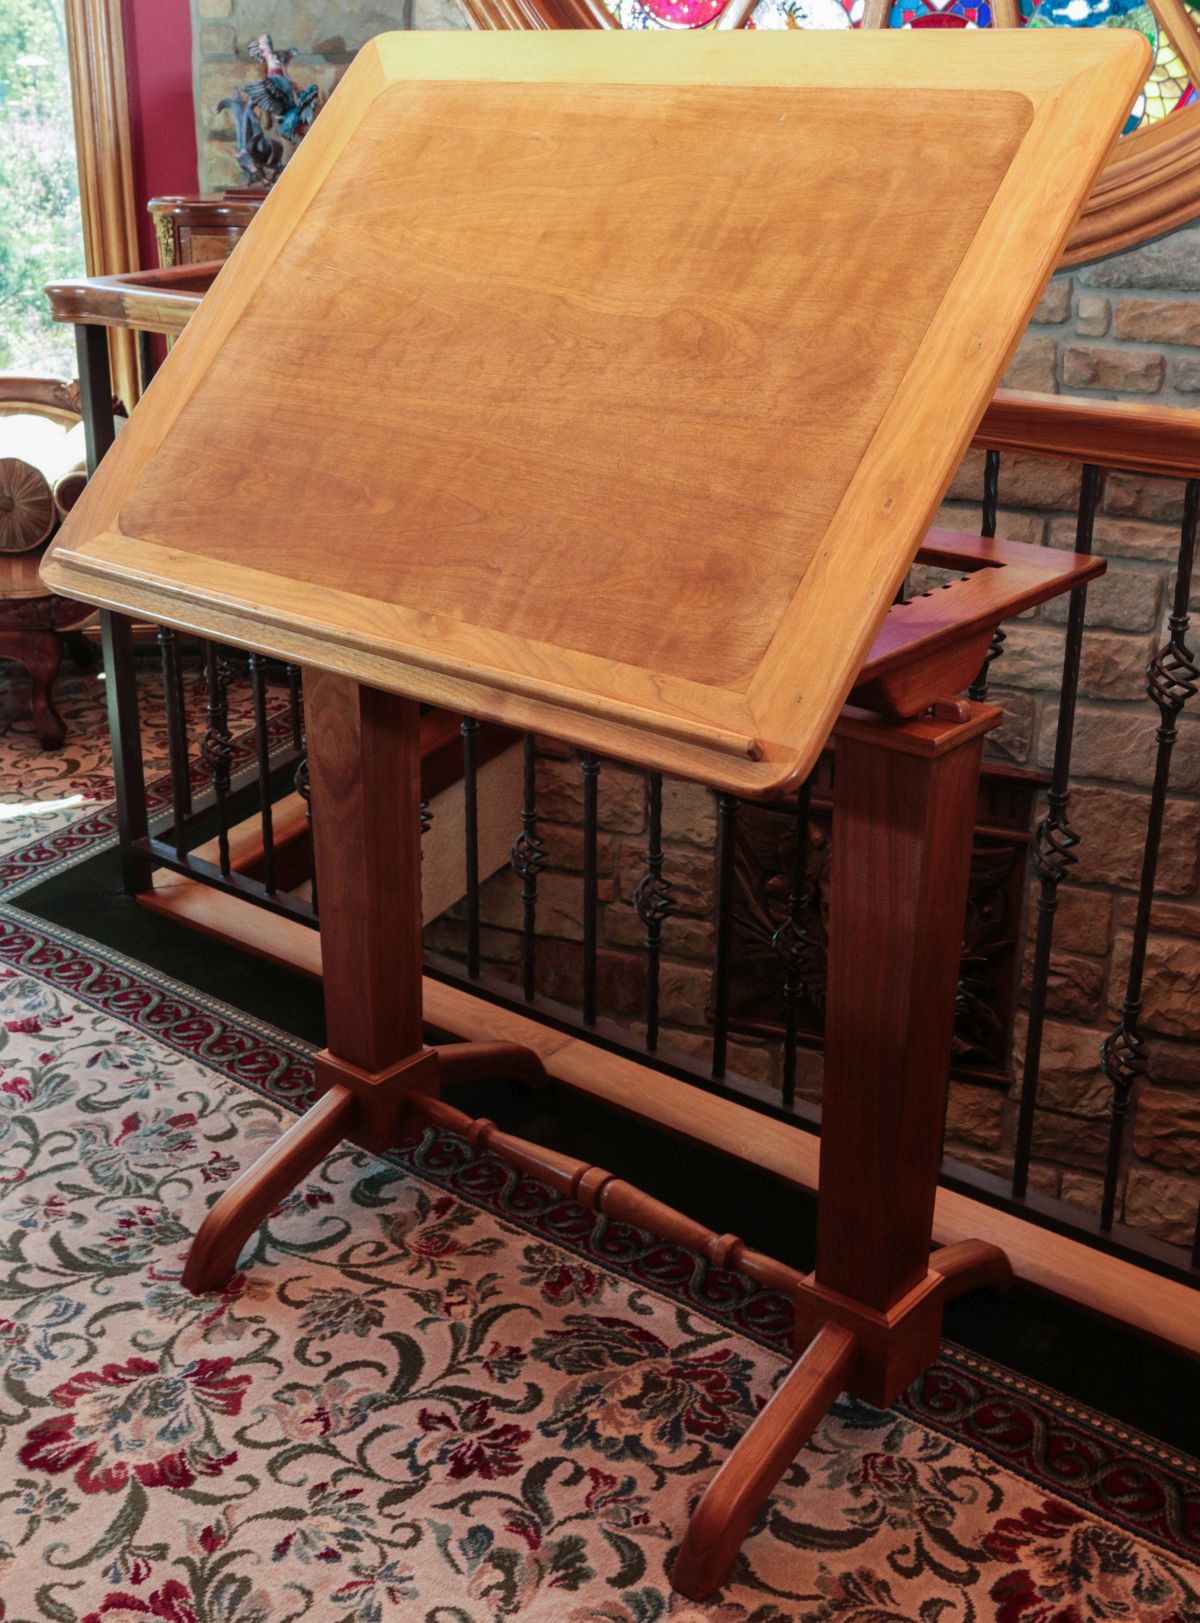 A NICE QUALITY MAPLE CONVERTIBLE DRAFTING TABLE